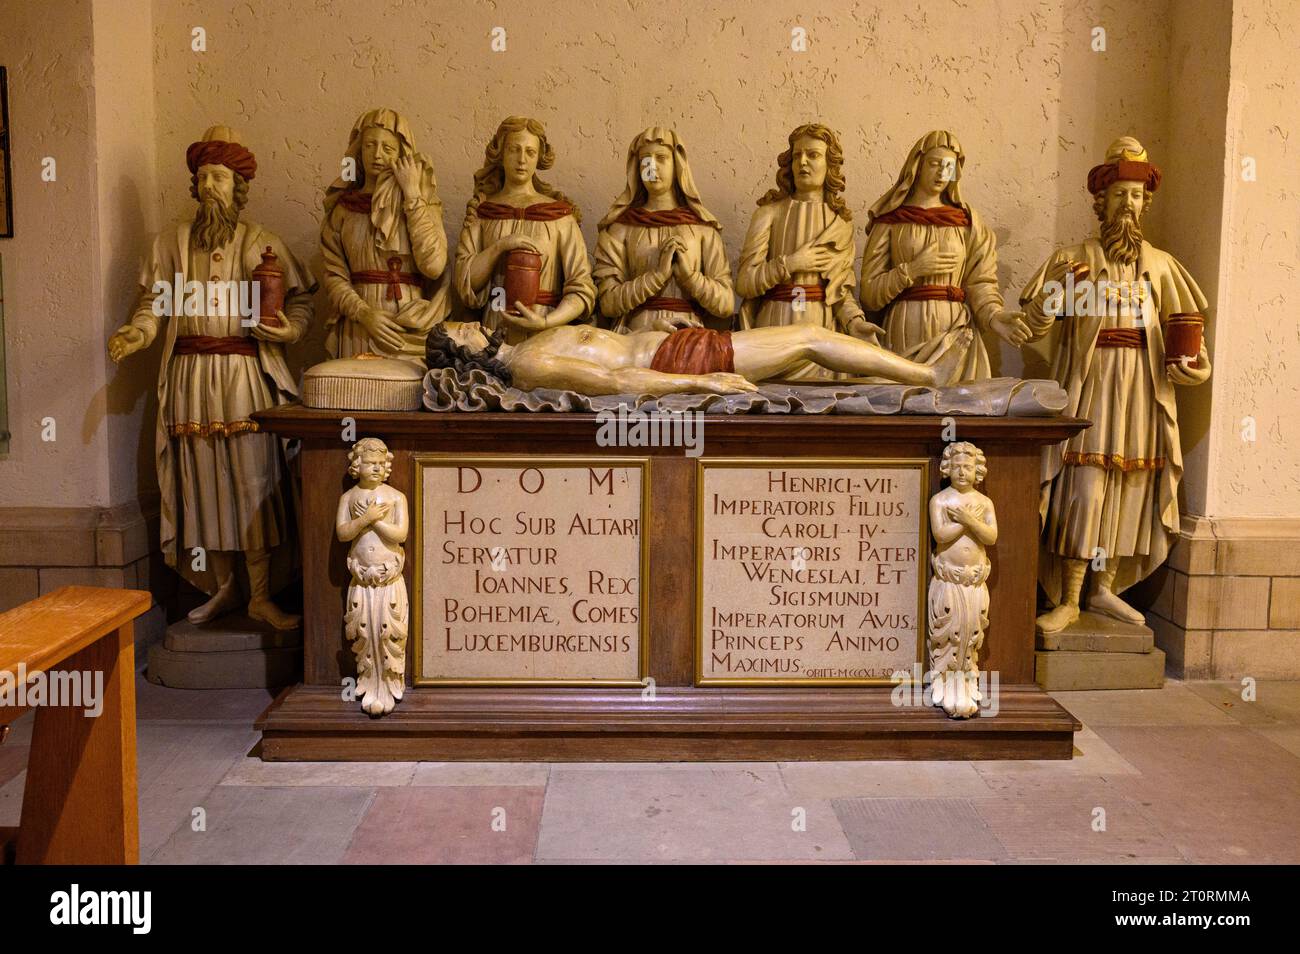 Tomb of John of Bohemia (also known as John the Blind or John of Luxembourg). Cathédrale Notre-Dame de Luxembourg. Stock Photo